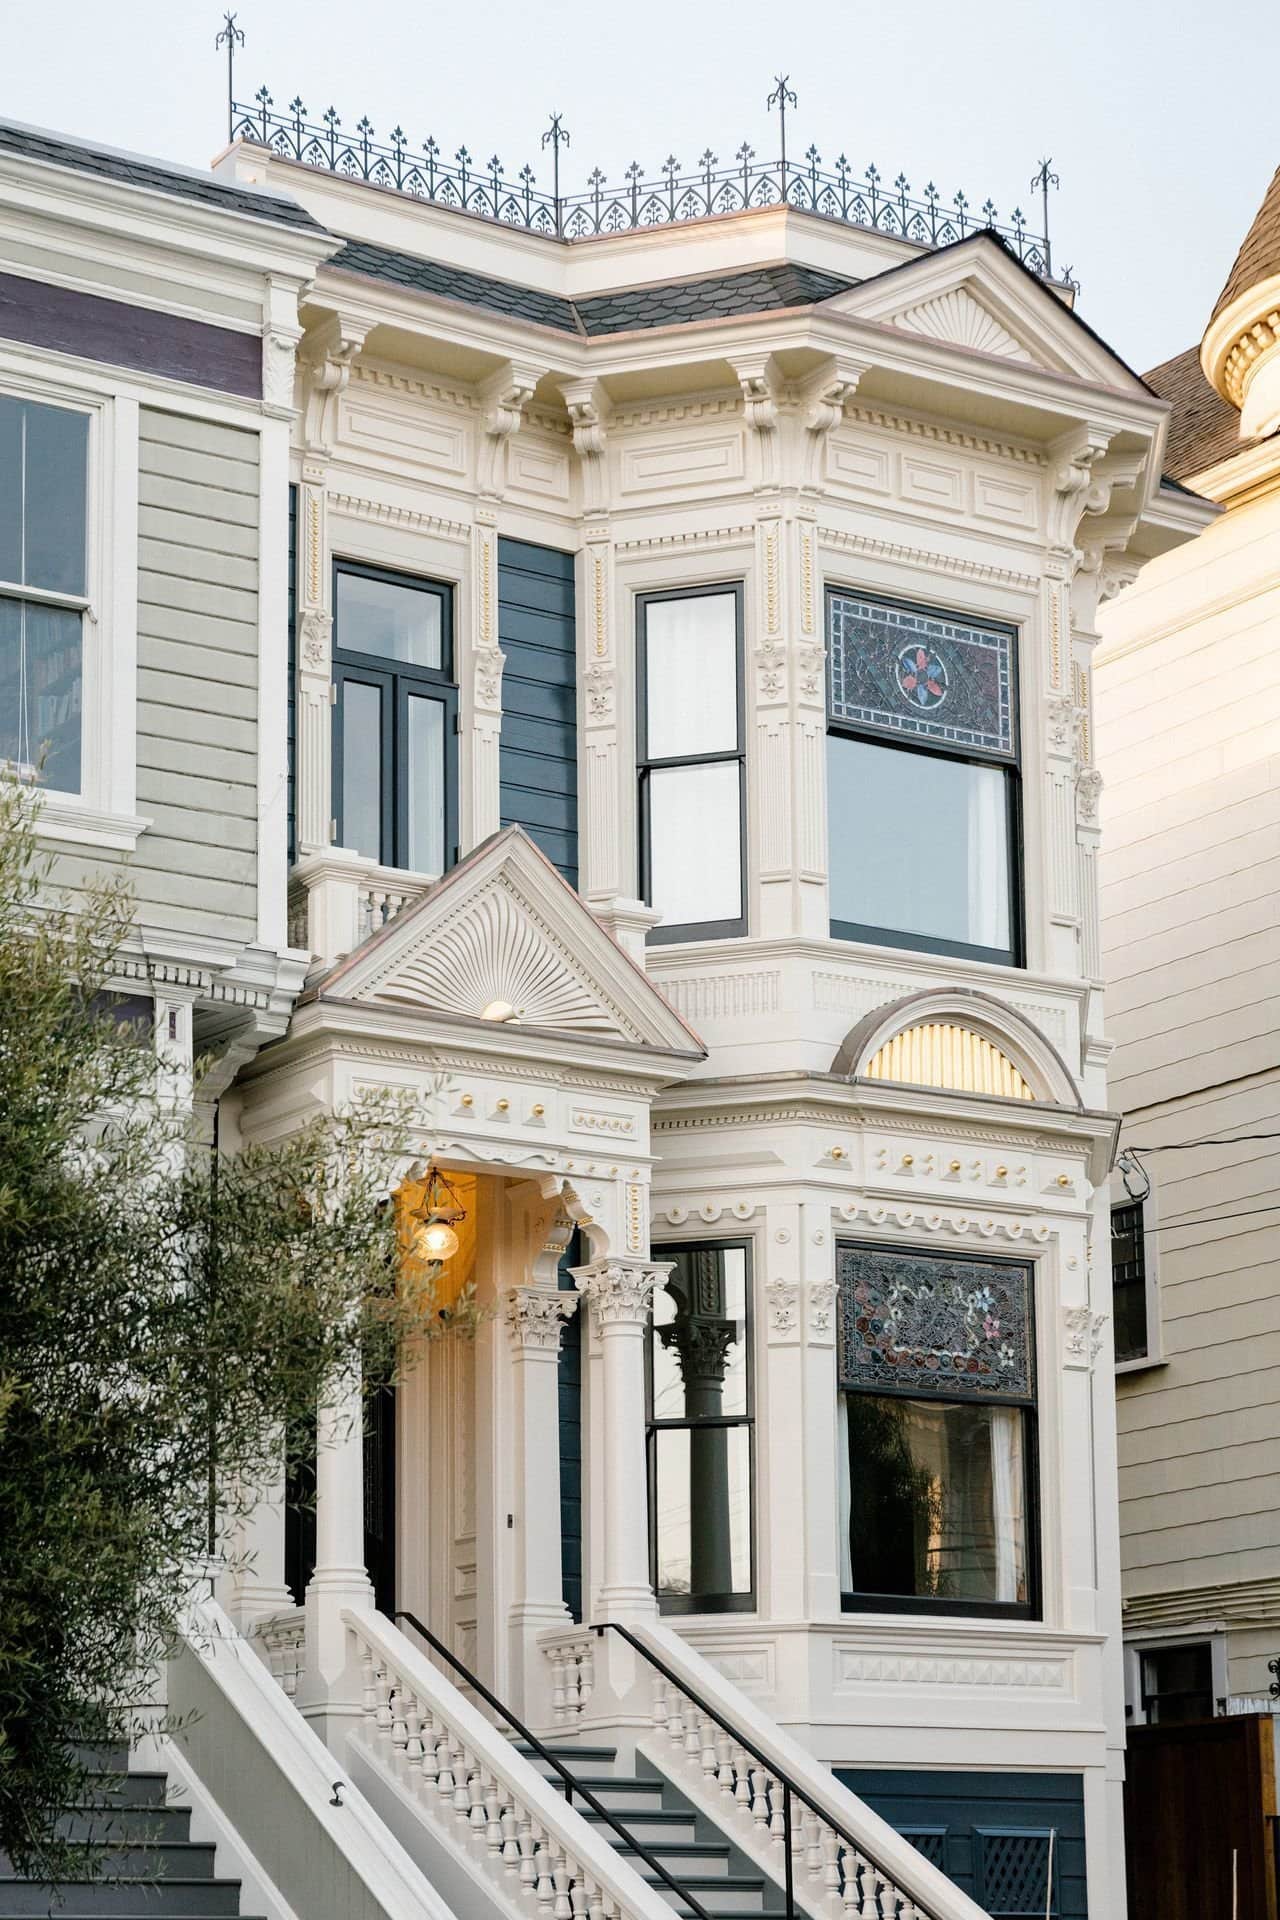 VICTORIAN WHITE HOUSE WITH BLACK WINDOWS